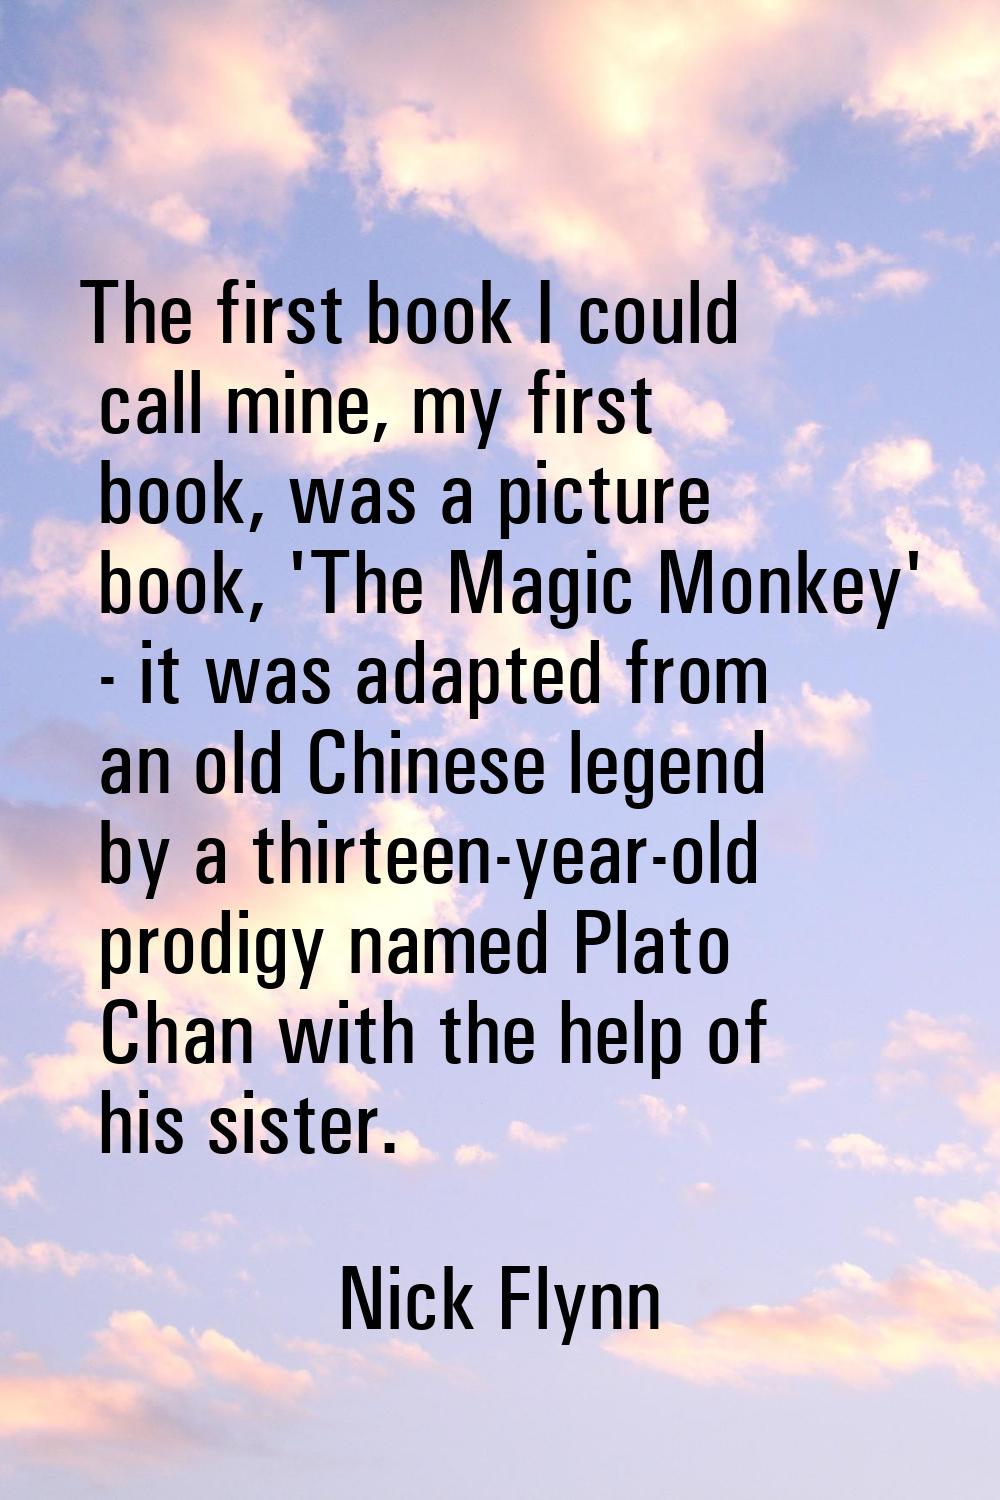 The first book I could call mine, my first book, was a picture book, 'The Magic Monkey' - it was ad